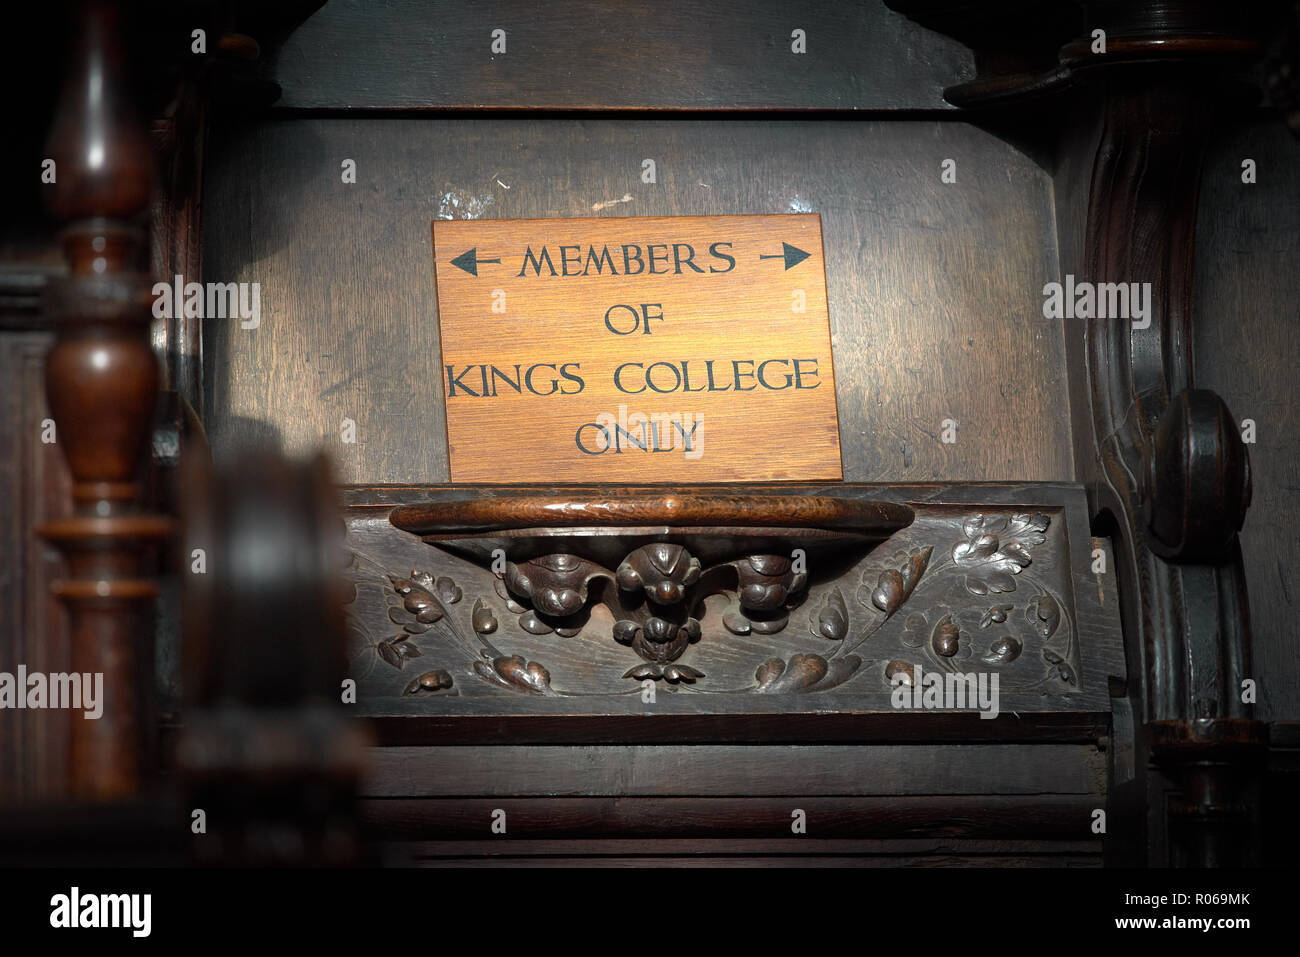 Notice on the underside of a bench in the choir of the tudor medieval chapel of King's college, university of Cambridge, England. Stock Photo